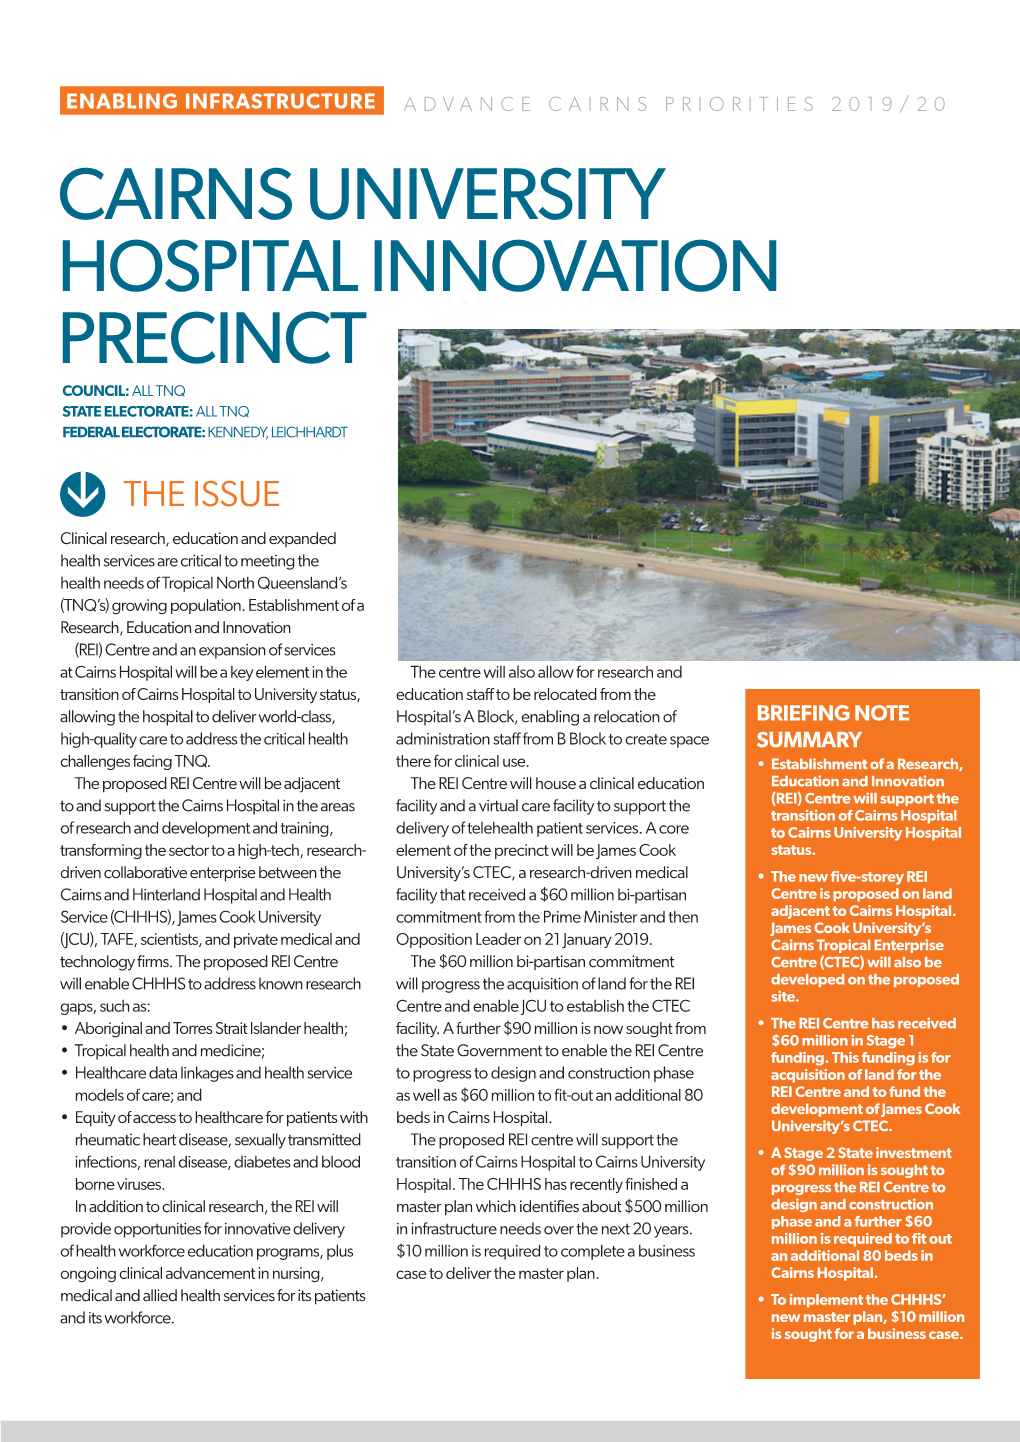 Cairns University Hospital Innovation Precinct Council: All Tnq State Electorate: All Tnq Federal Electorate: Kennedy, Leichhardt